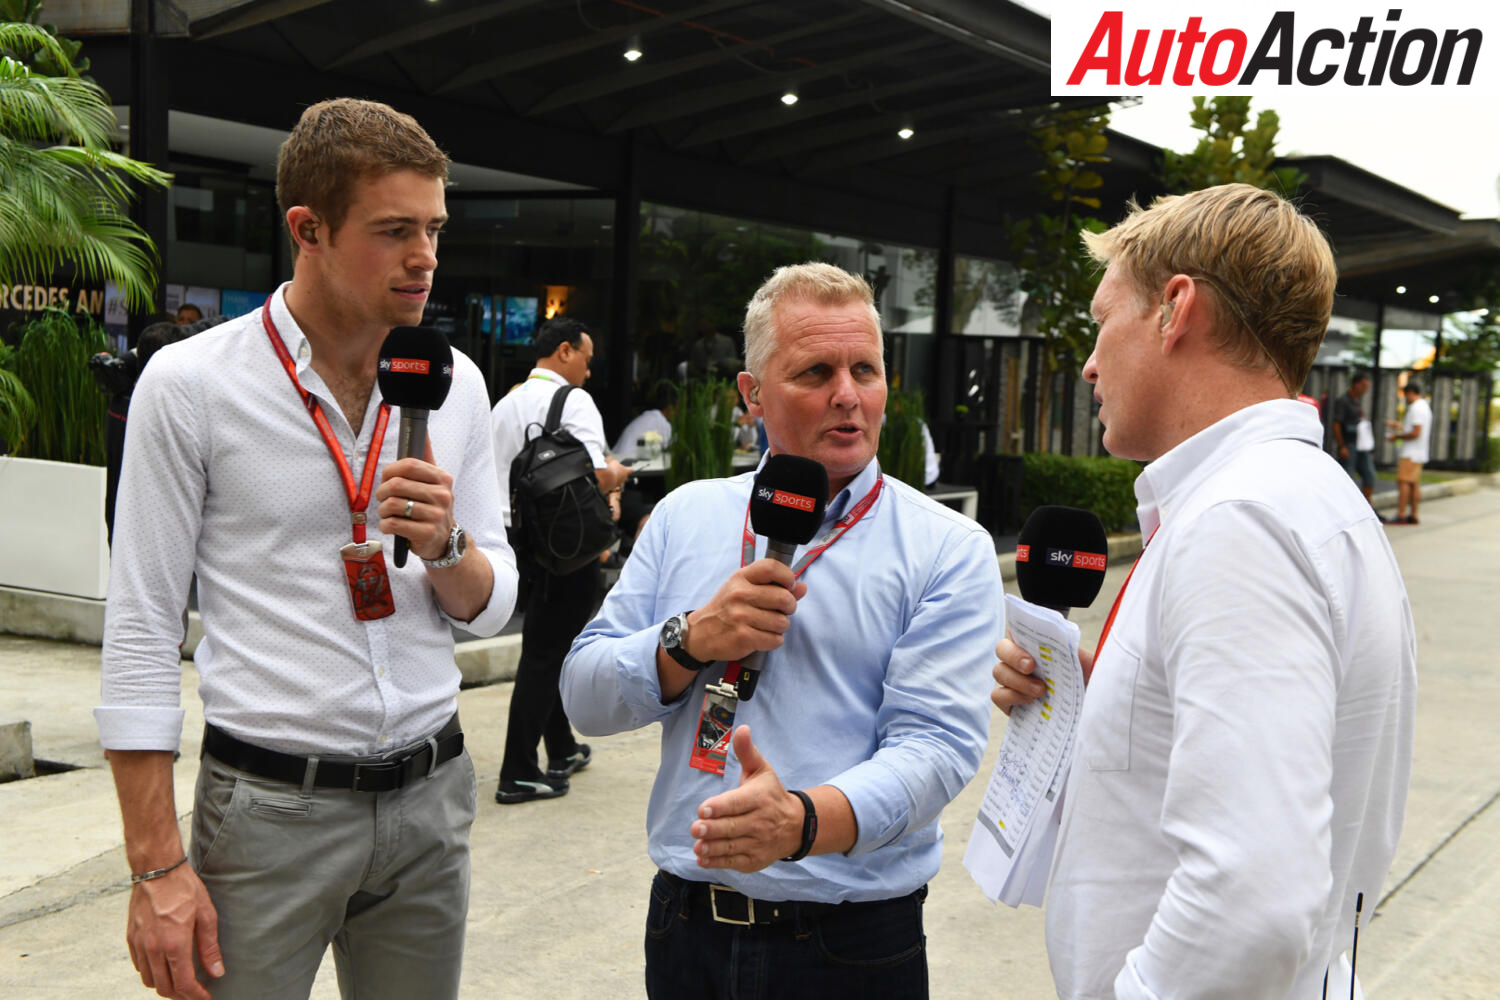 Herbert and Di Resta Dropped From Sky Sports F1 Team Auto Action